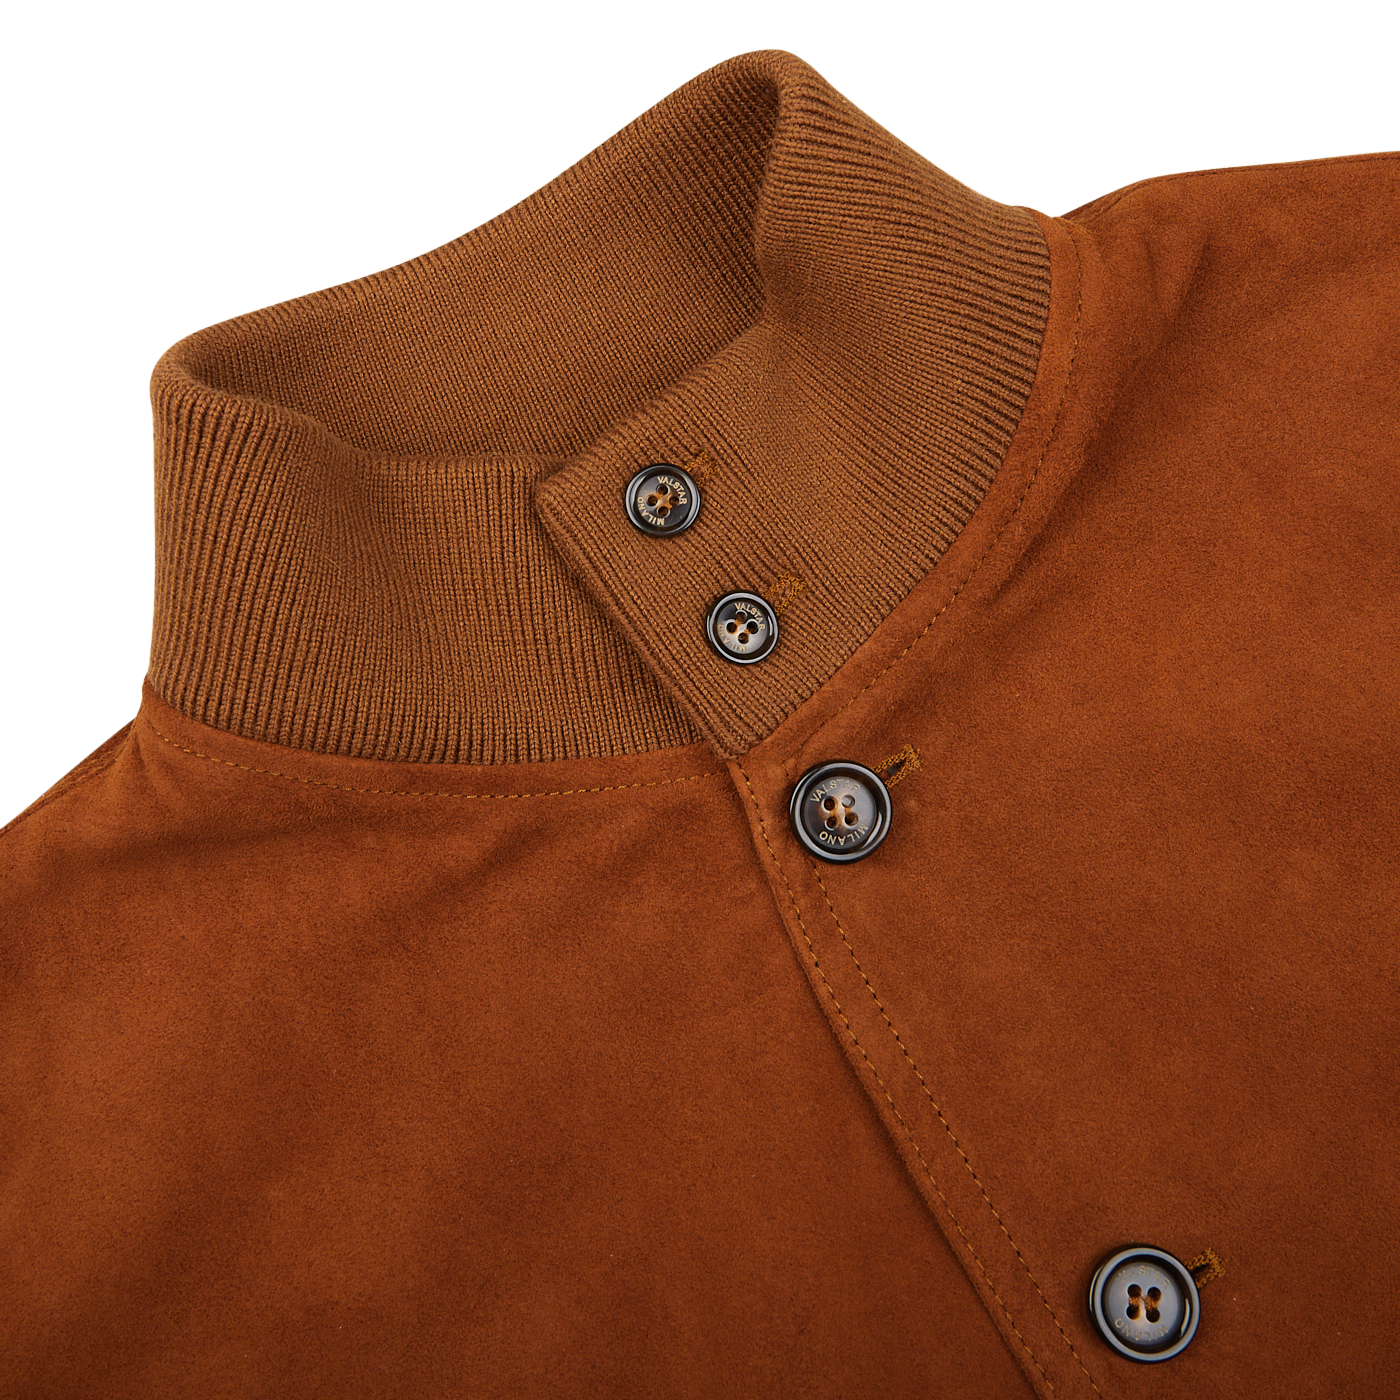 Close-up of a brown Valstarino buttoned shirt with a textured collar.